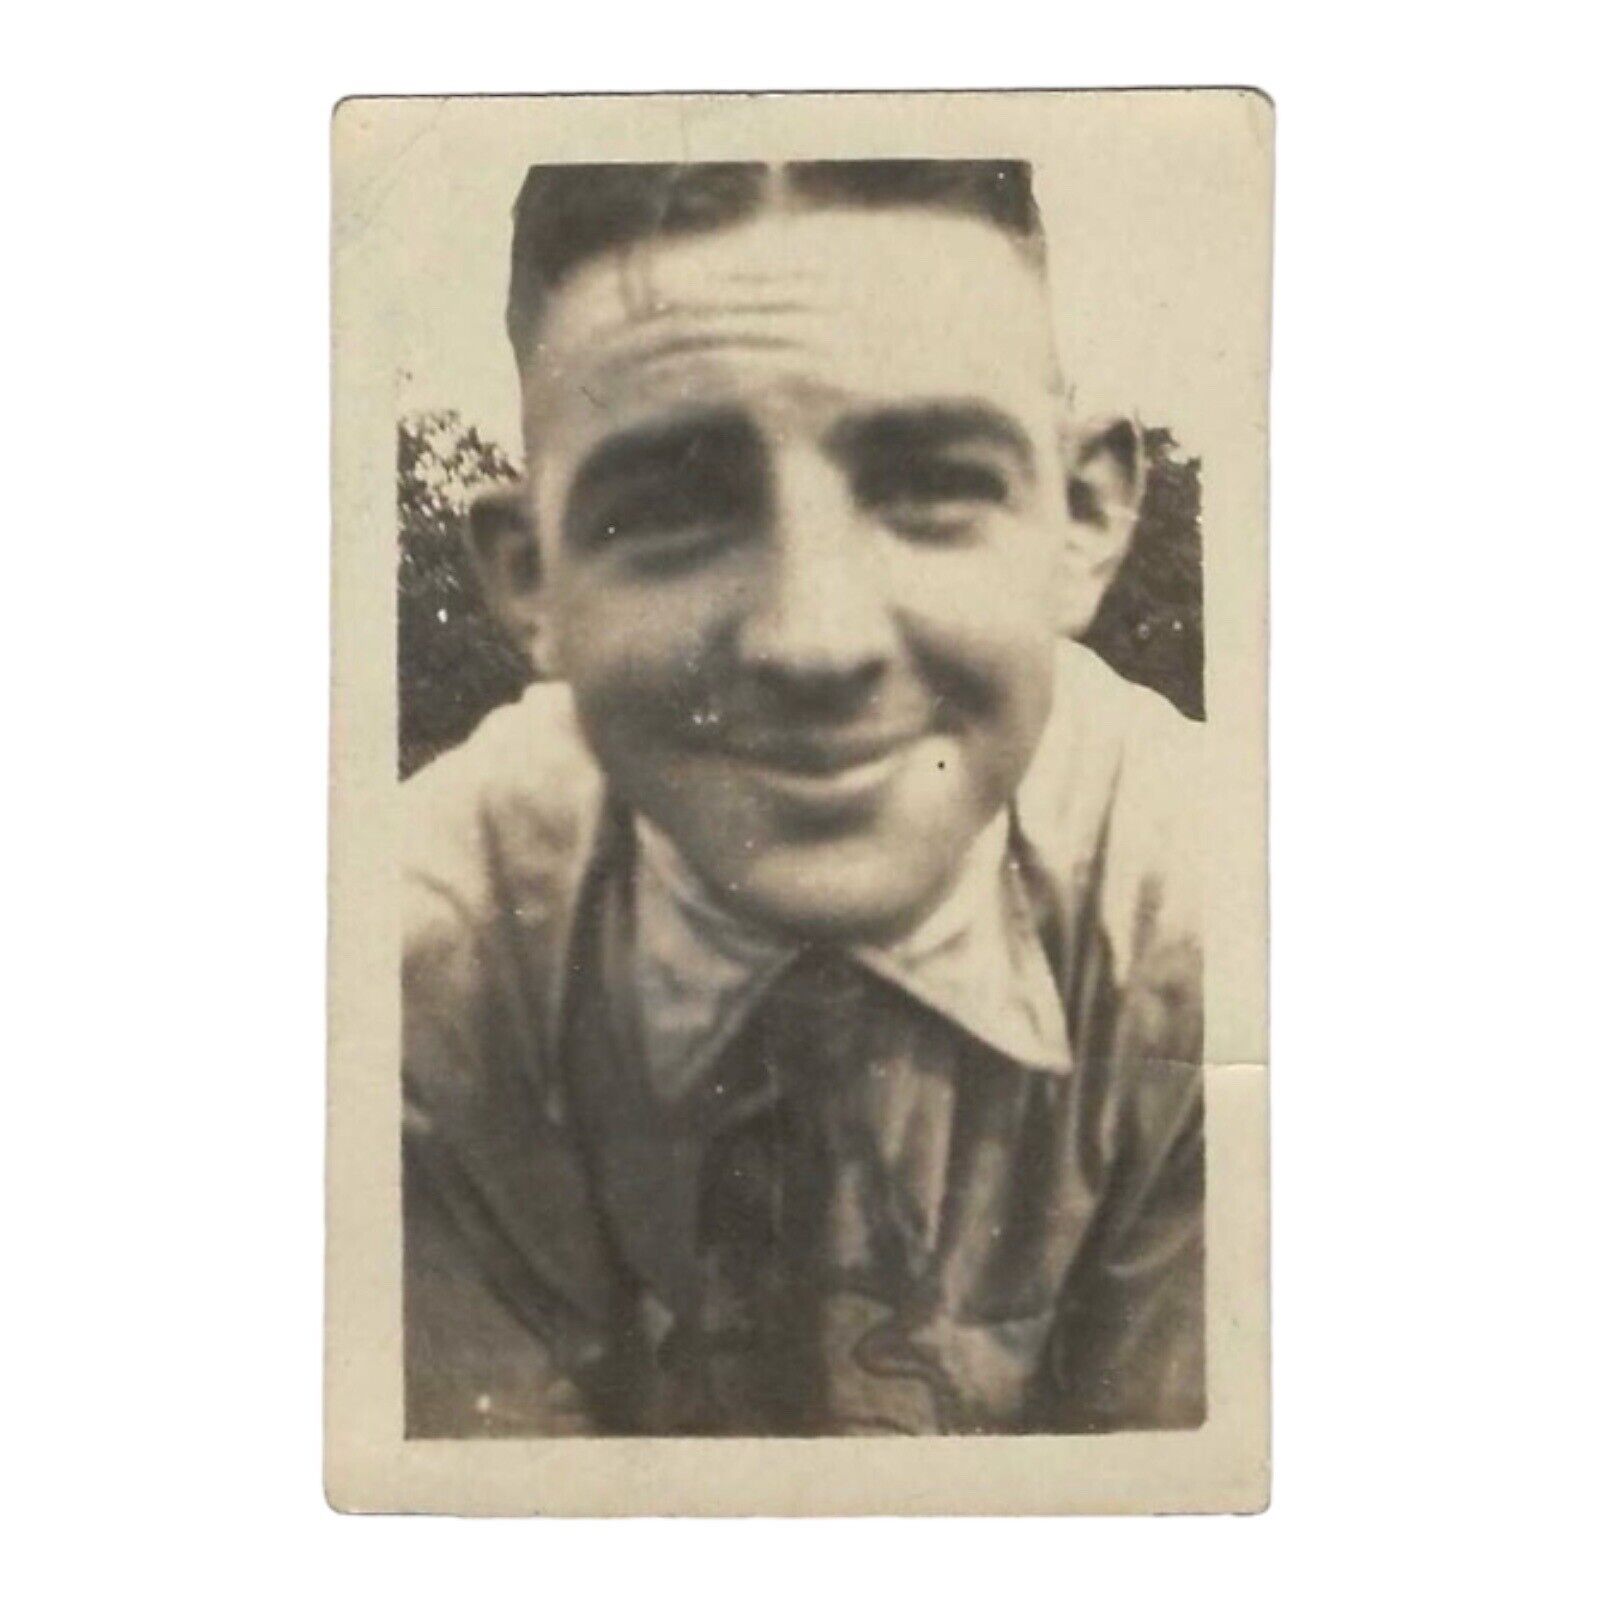 Small Vintage Snapshot Photo Closeup Shot Of Handsome Young Man 1910s